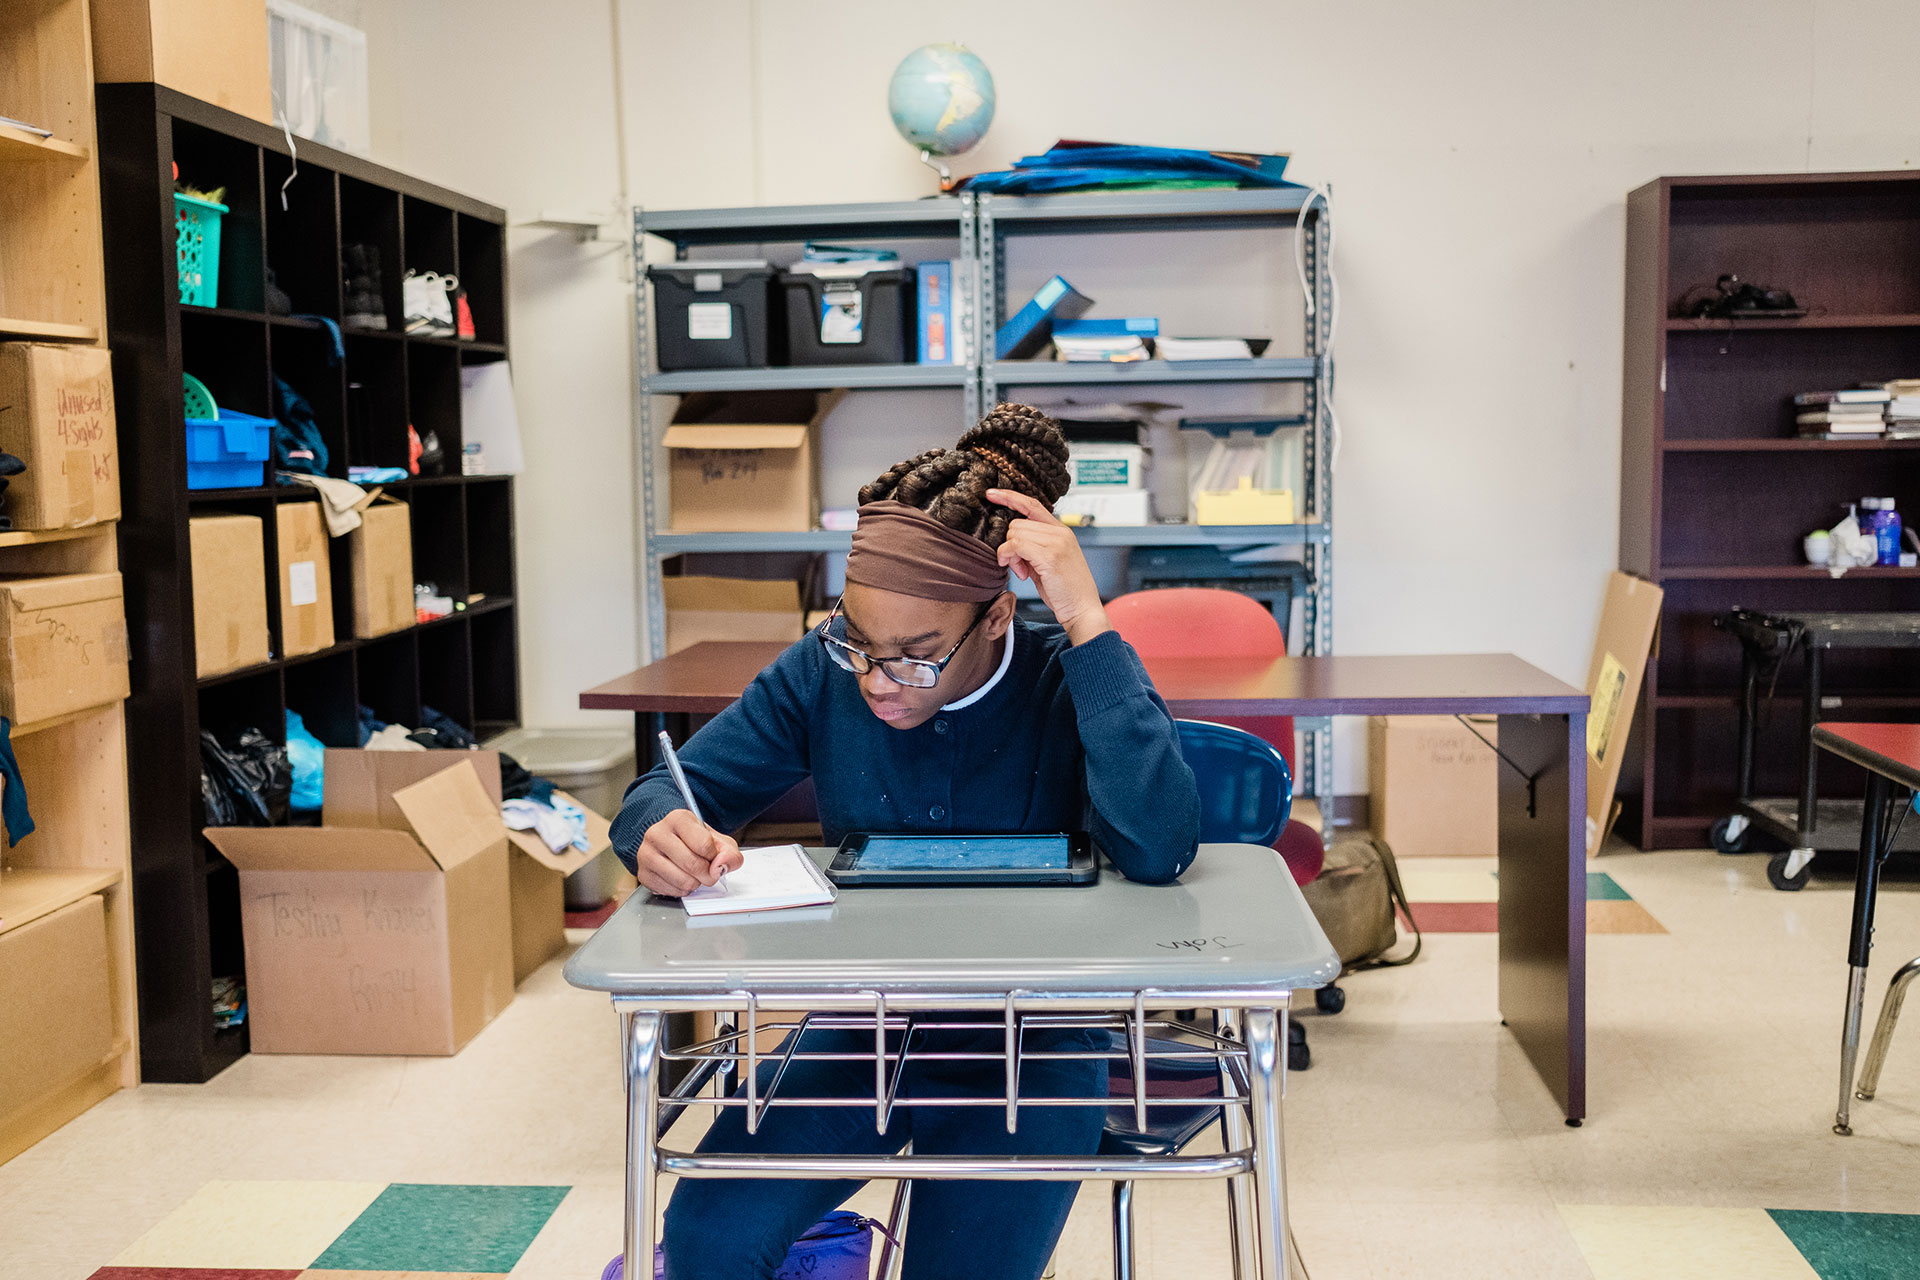 Students complete both guided and self-directed math exercises with PL² at Propel Homestead. / Photo by Ben Filio